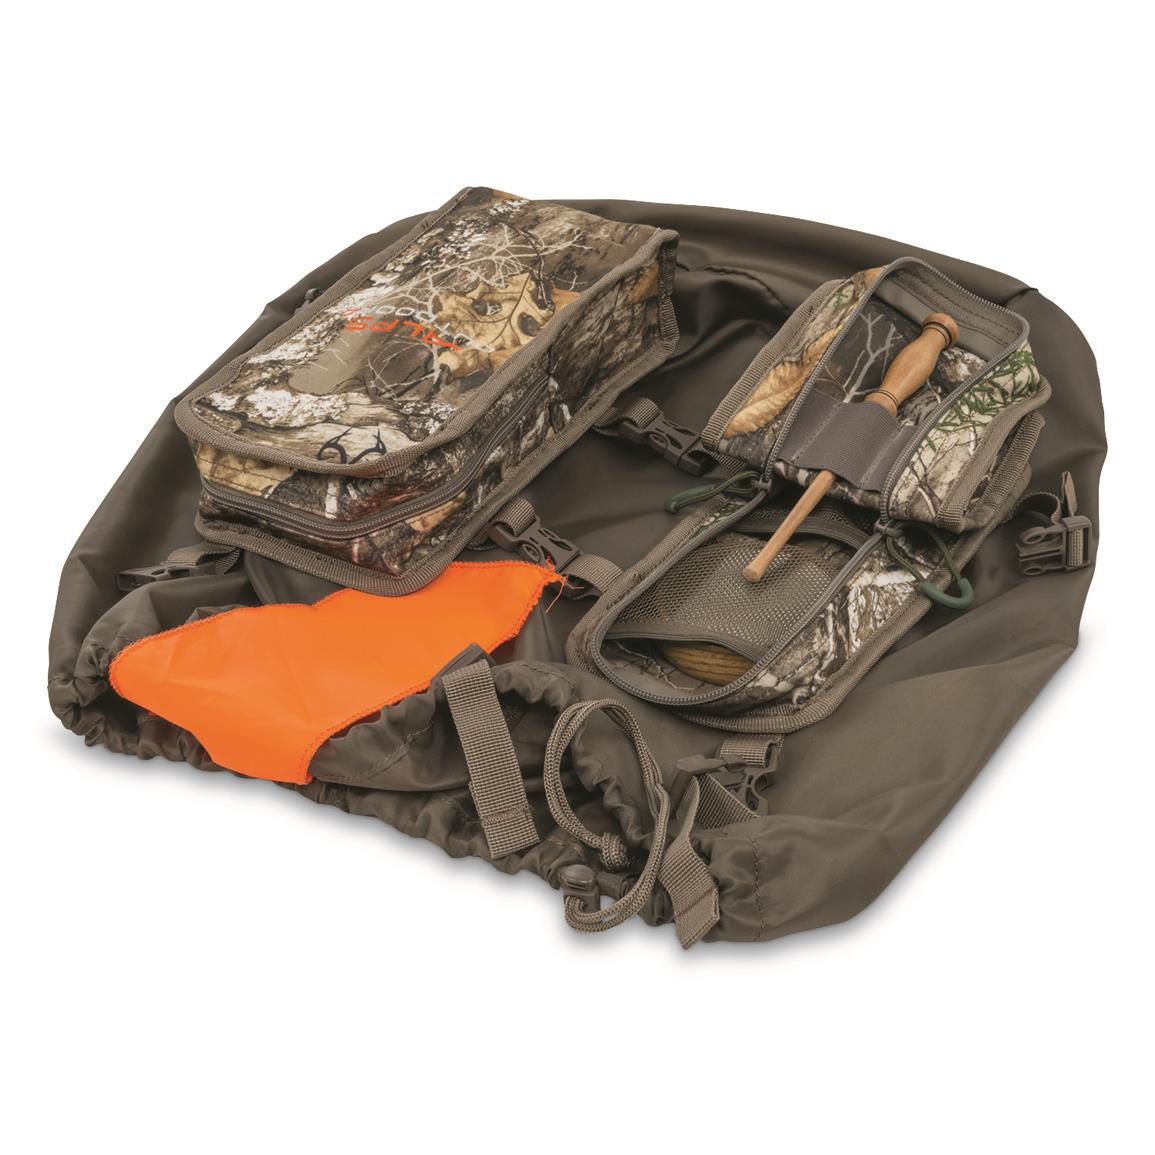 ALPS OutdoorZ Turkey Call Pockets and Game Bag